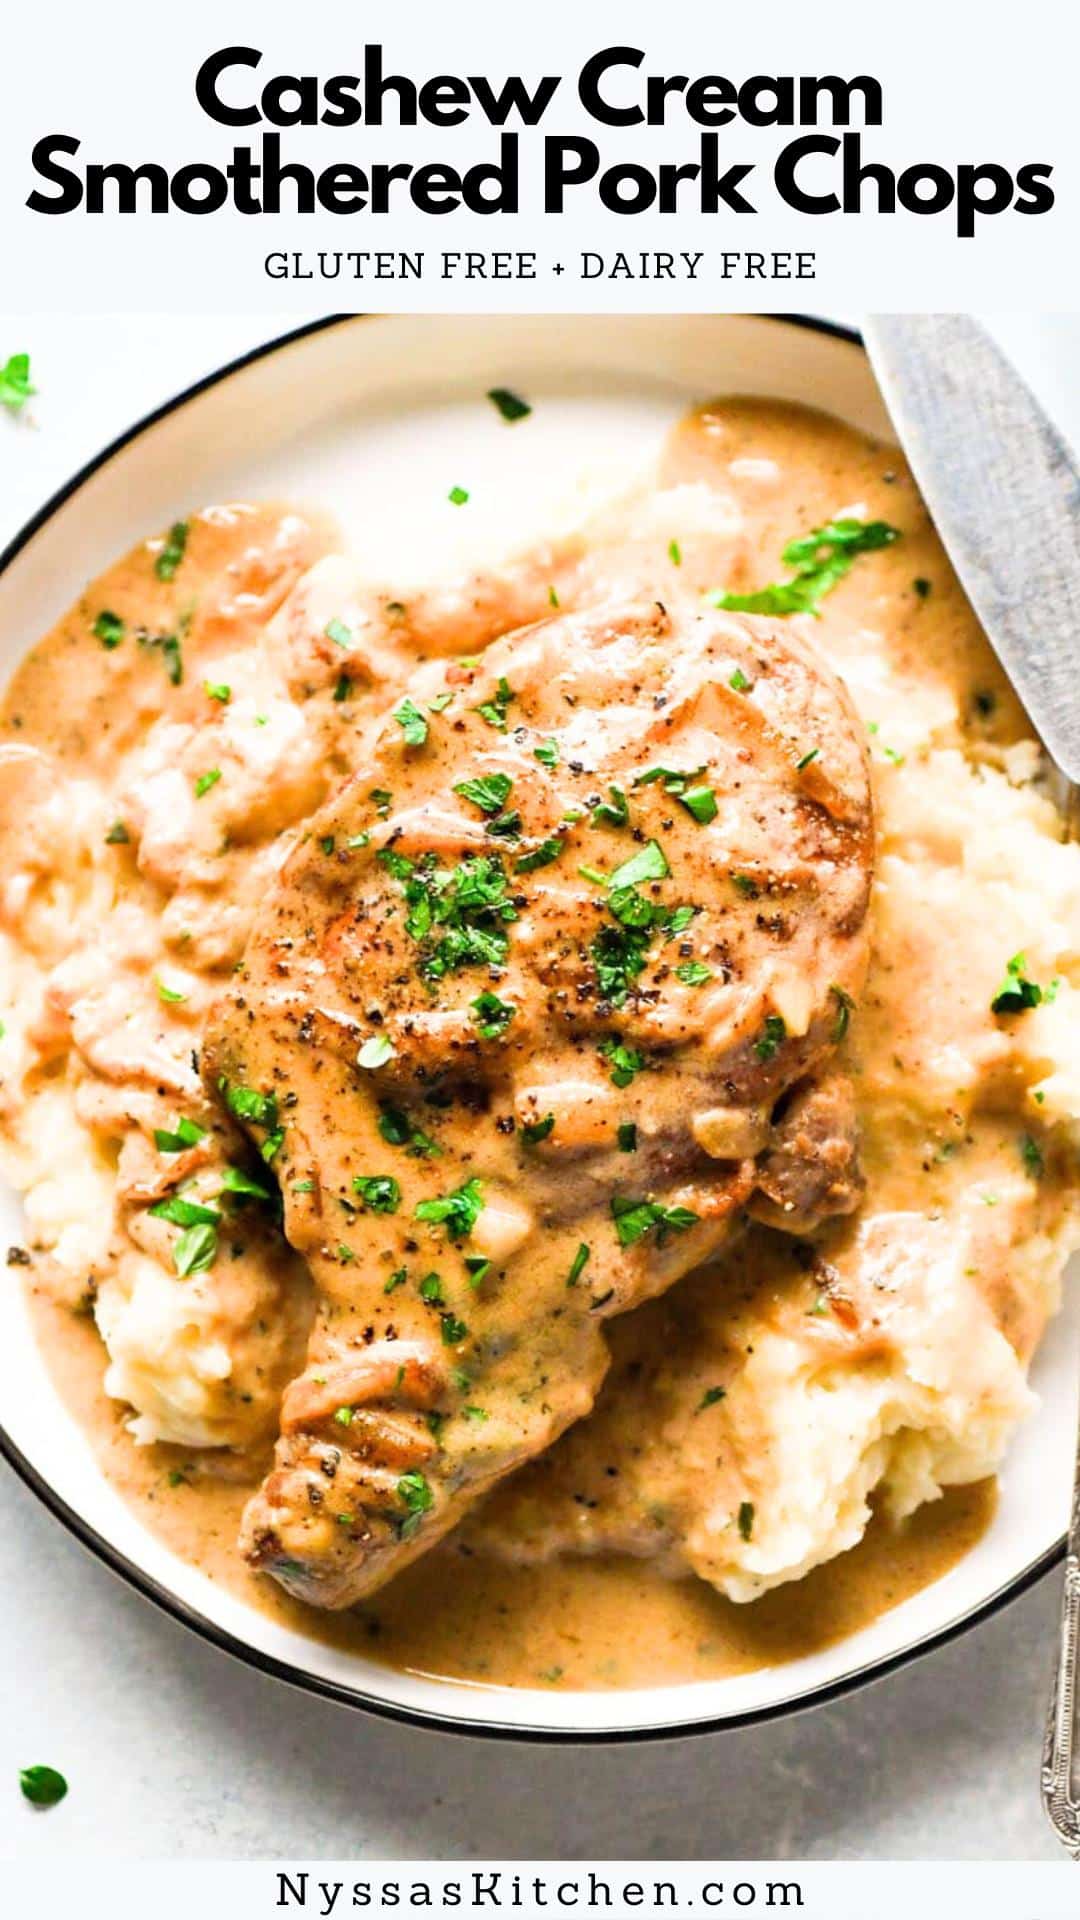 These smothered pork chops made with cashew cream instead of dairy are the perfect healthy comfort food! The sauce is made with sweet caramelized onions, flavorful herbs, and a smooth and luscious cashew cream that is 100% dairy free. An ideal cold weather dinner that will warm you up from the inside out. Recipe is gluten free, dairy free, whole30 compatible, and paleo friendly.